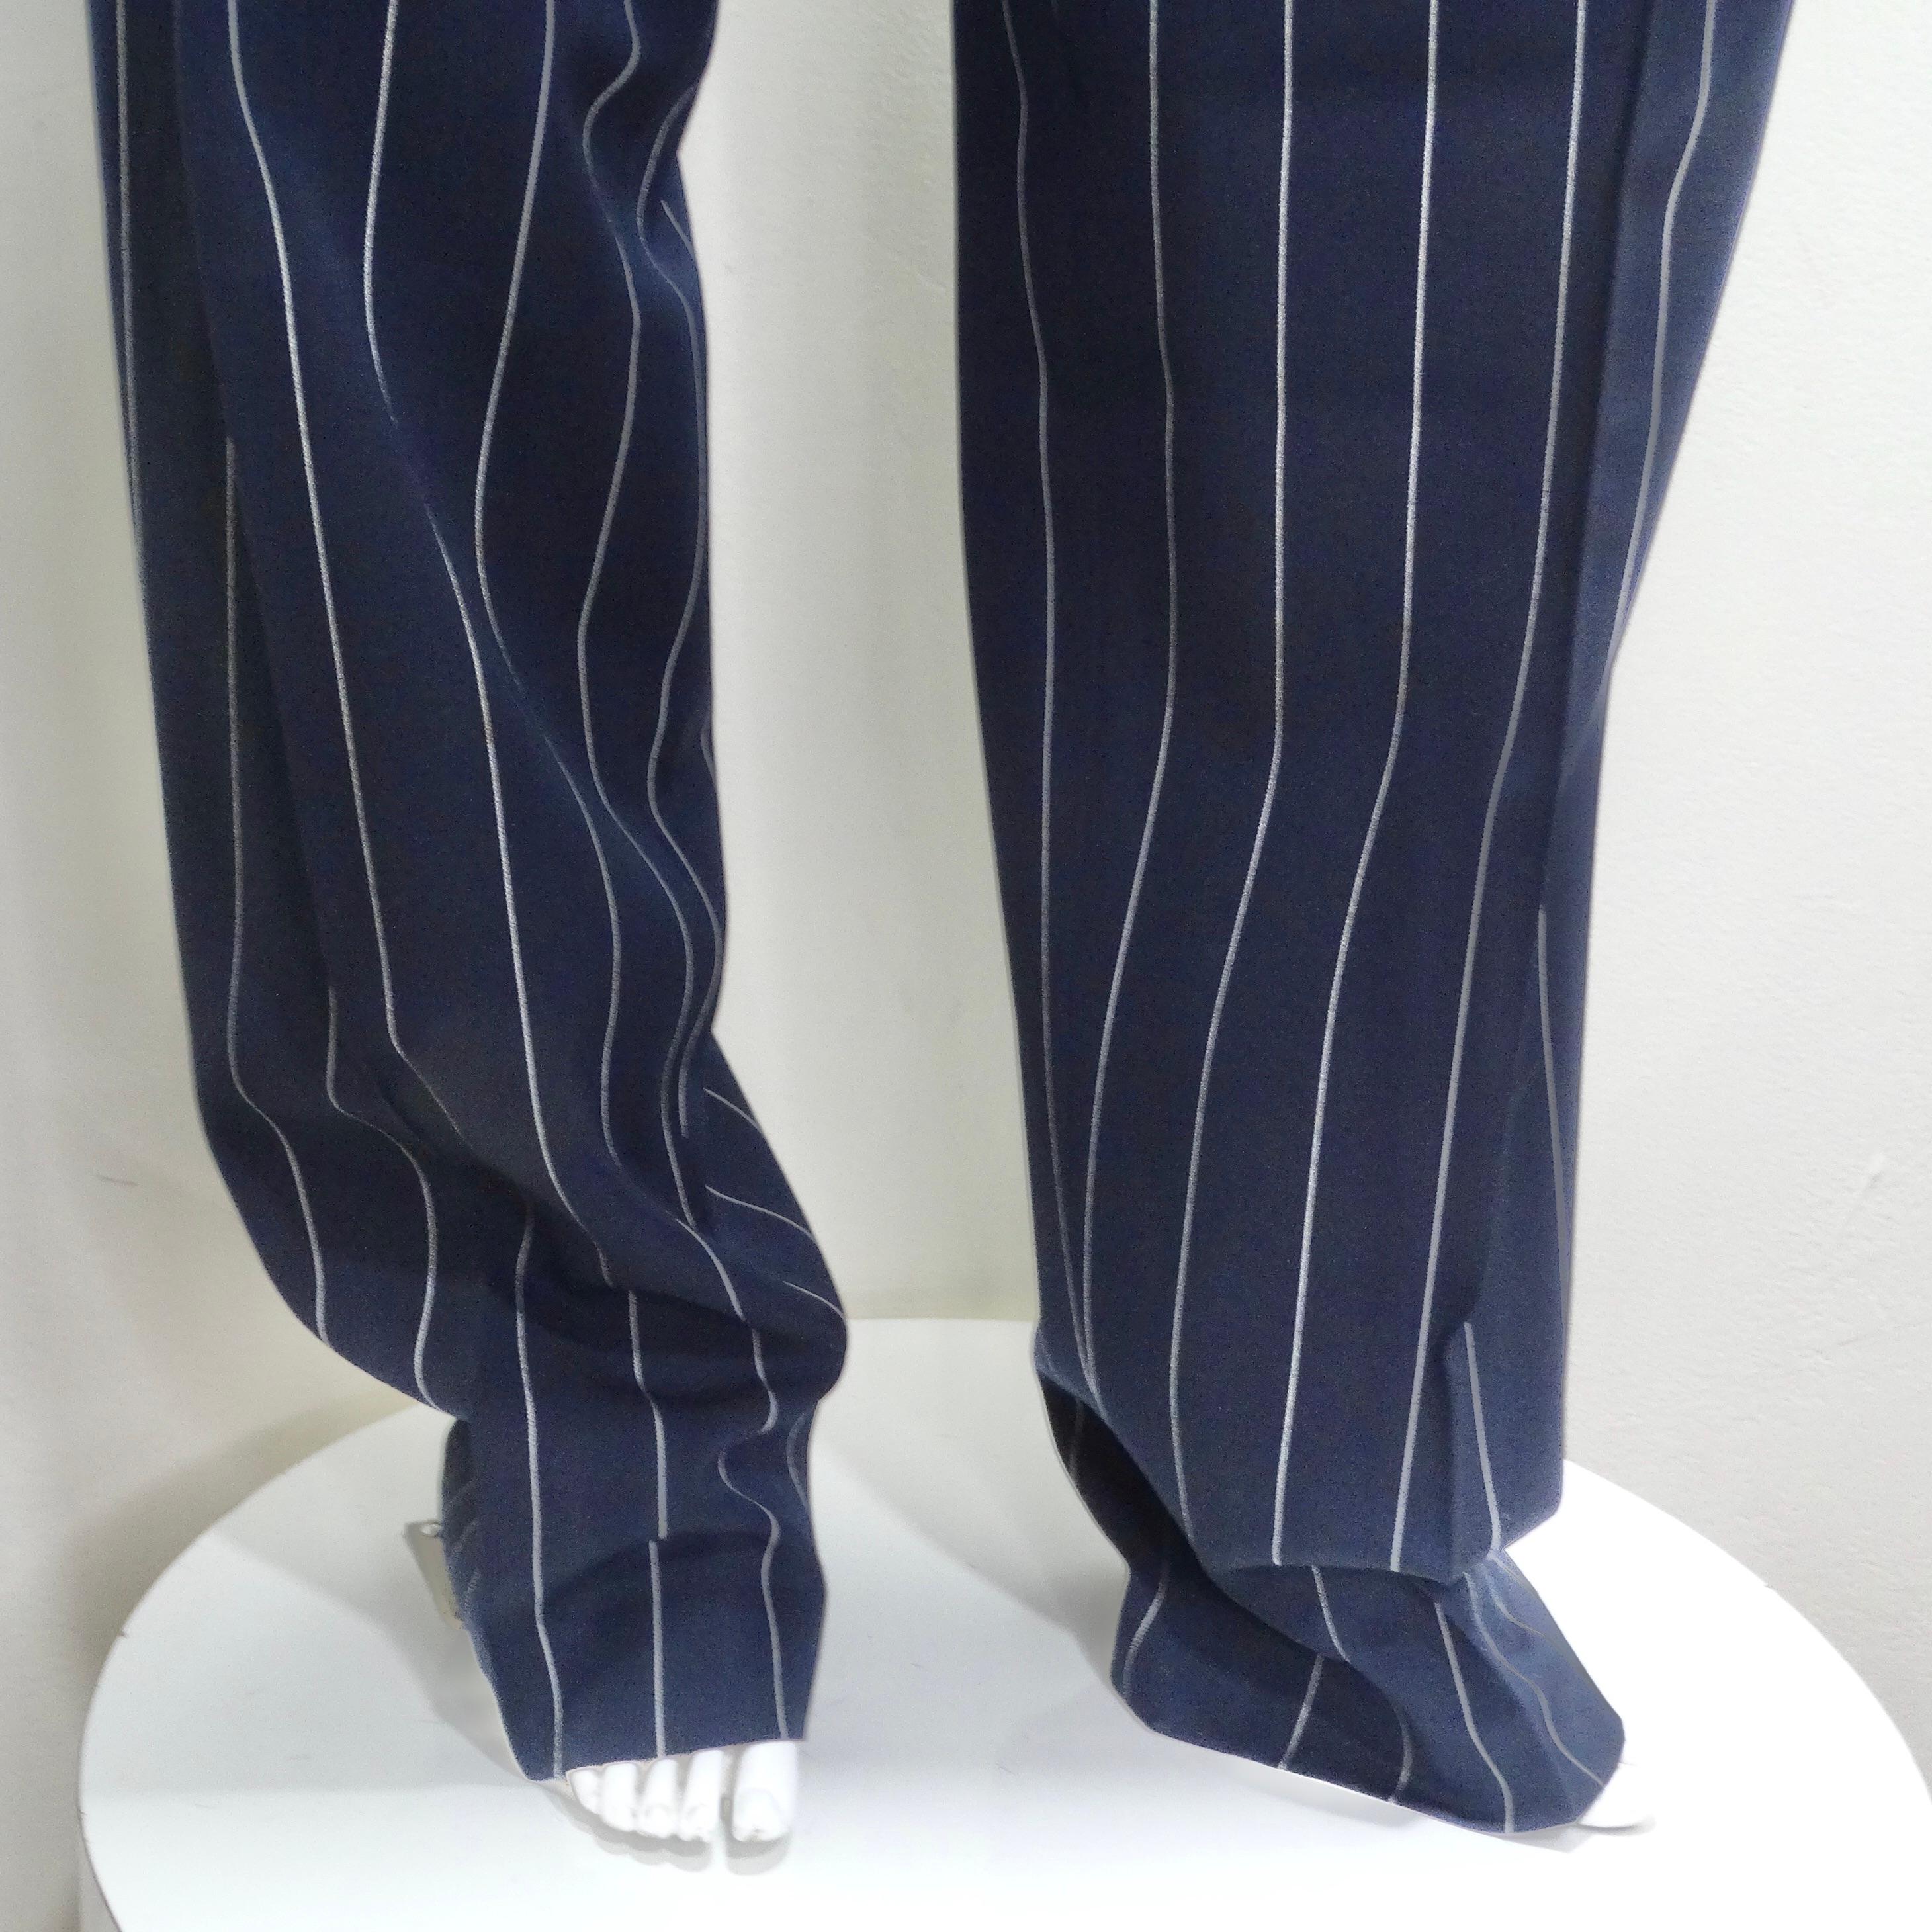 Christian Dior 1990s Navy Pinstripe Suit In Good Condition For Sale In Scottsdale, AZ